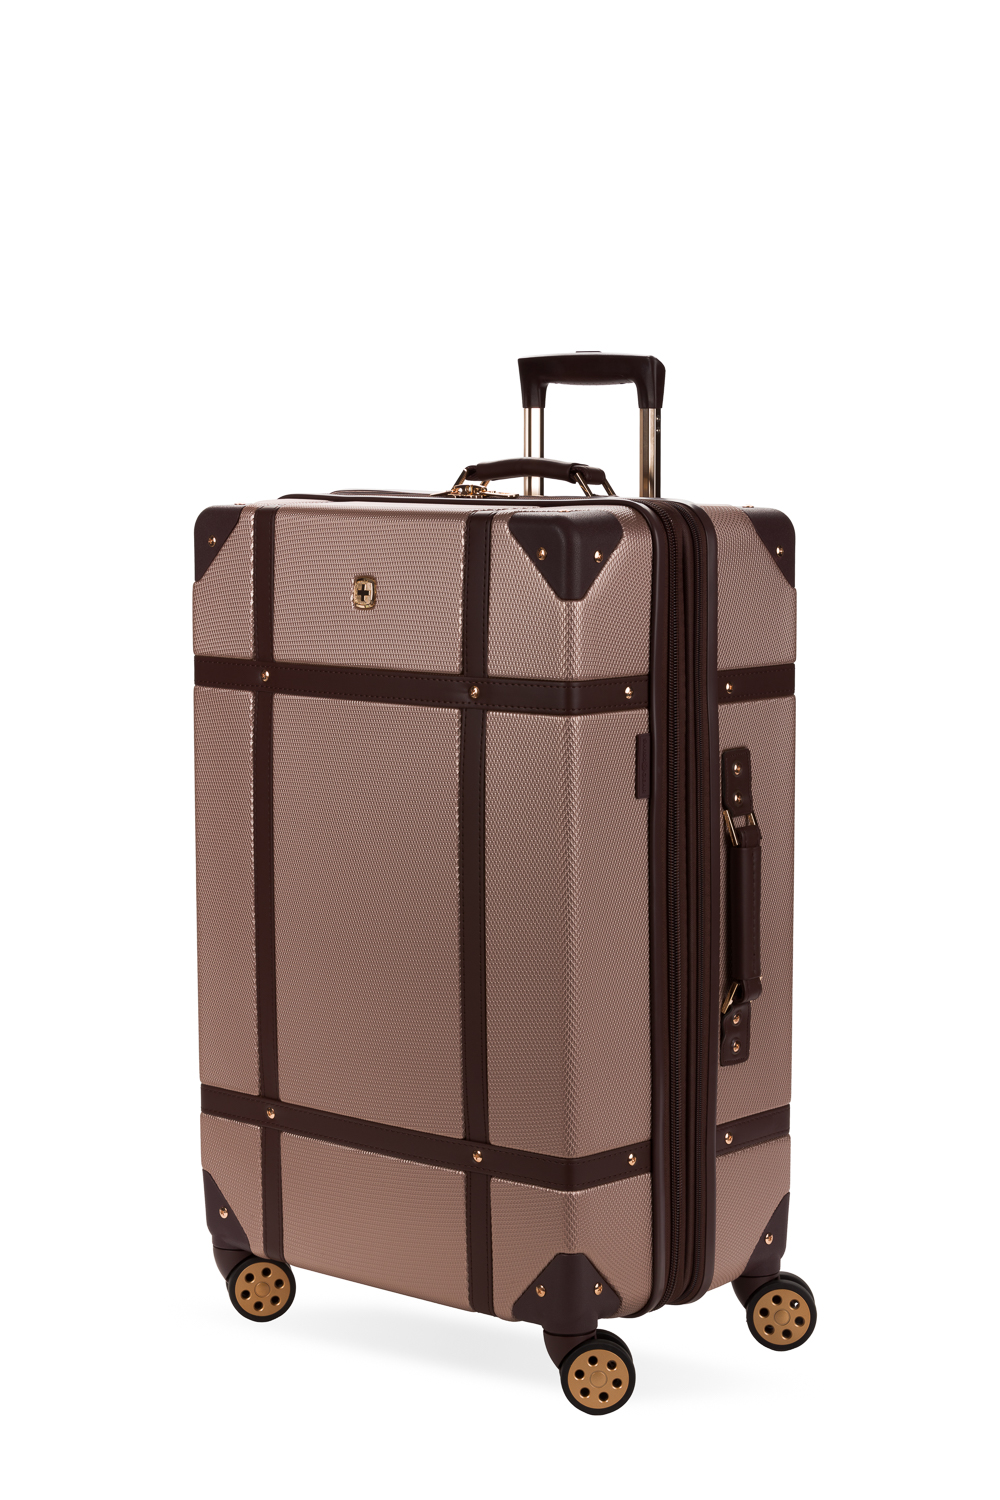 Swissgear 7739 26 Expandable Trunk Spinner Luggage